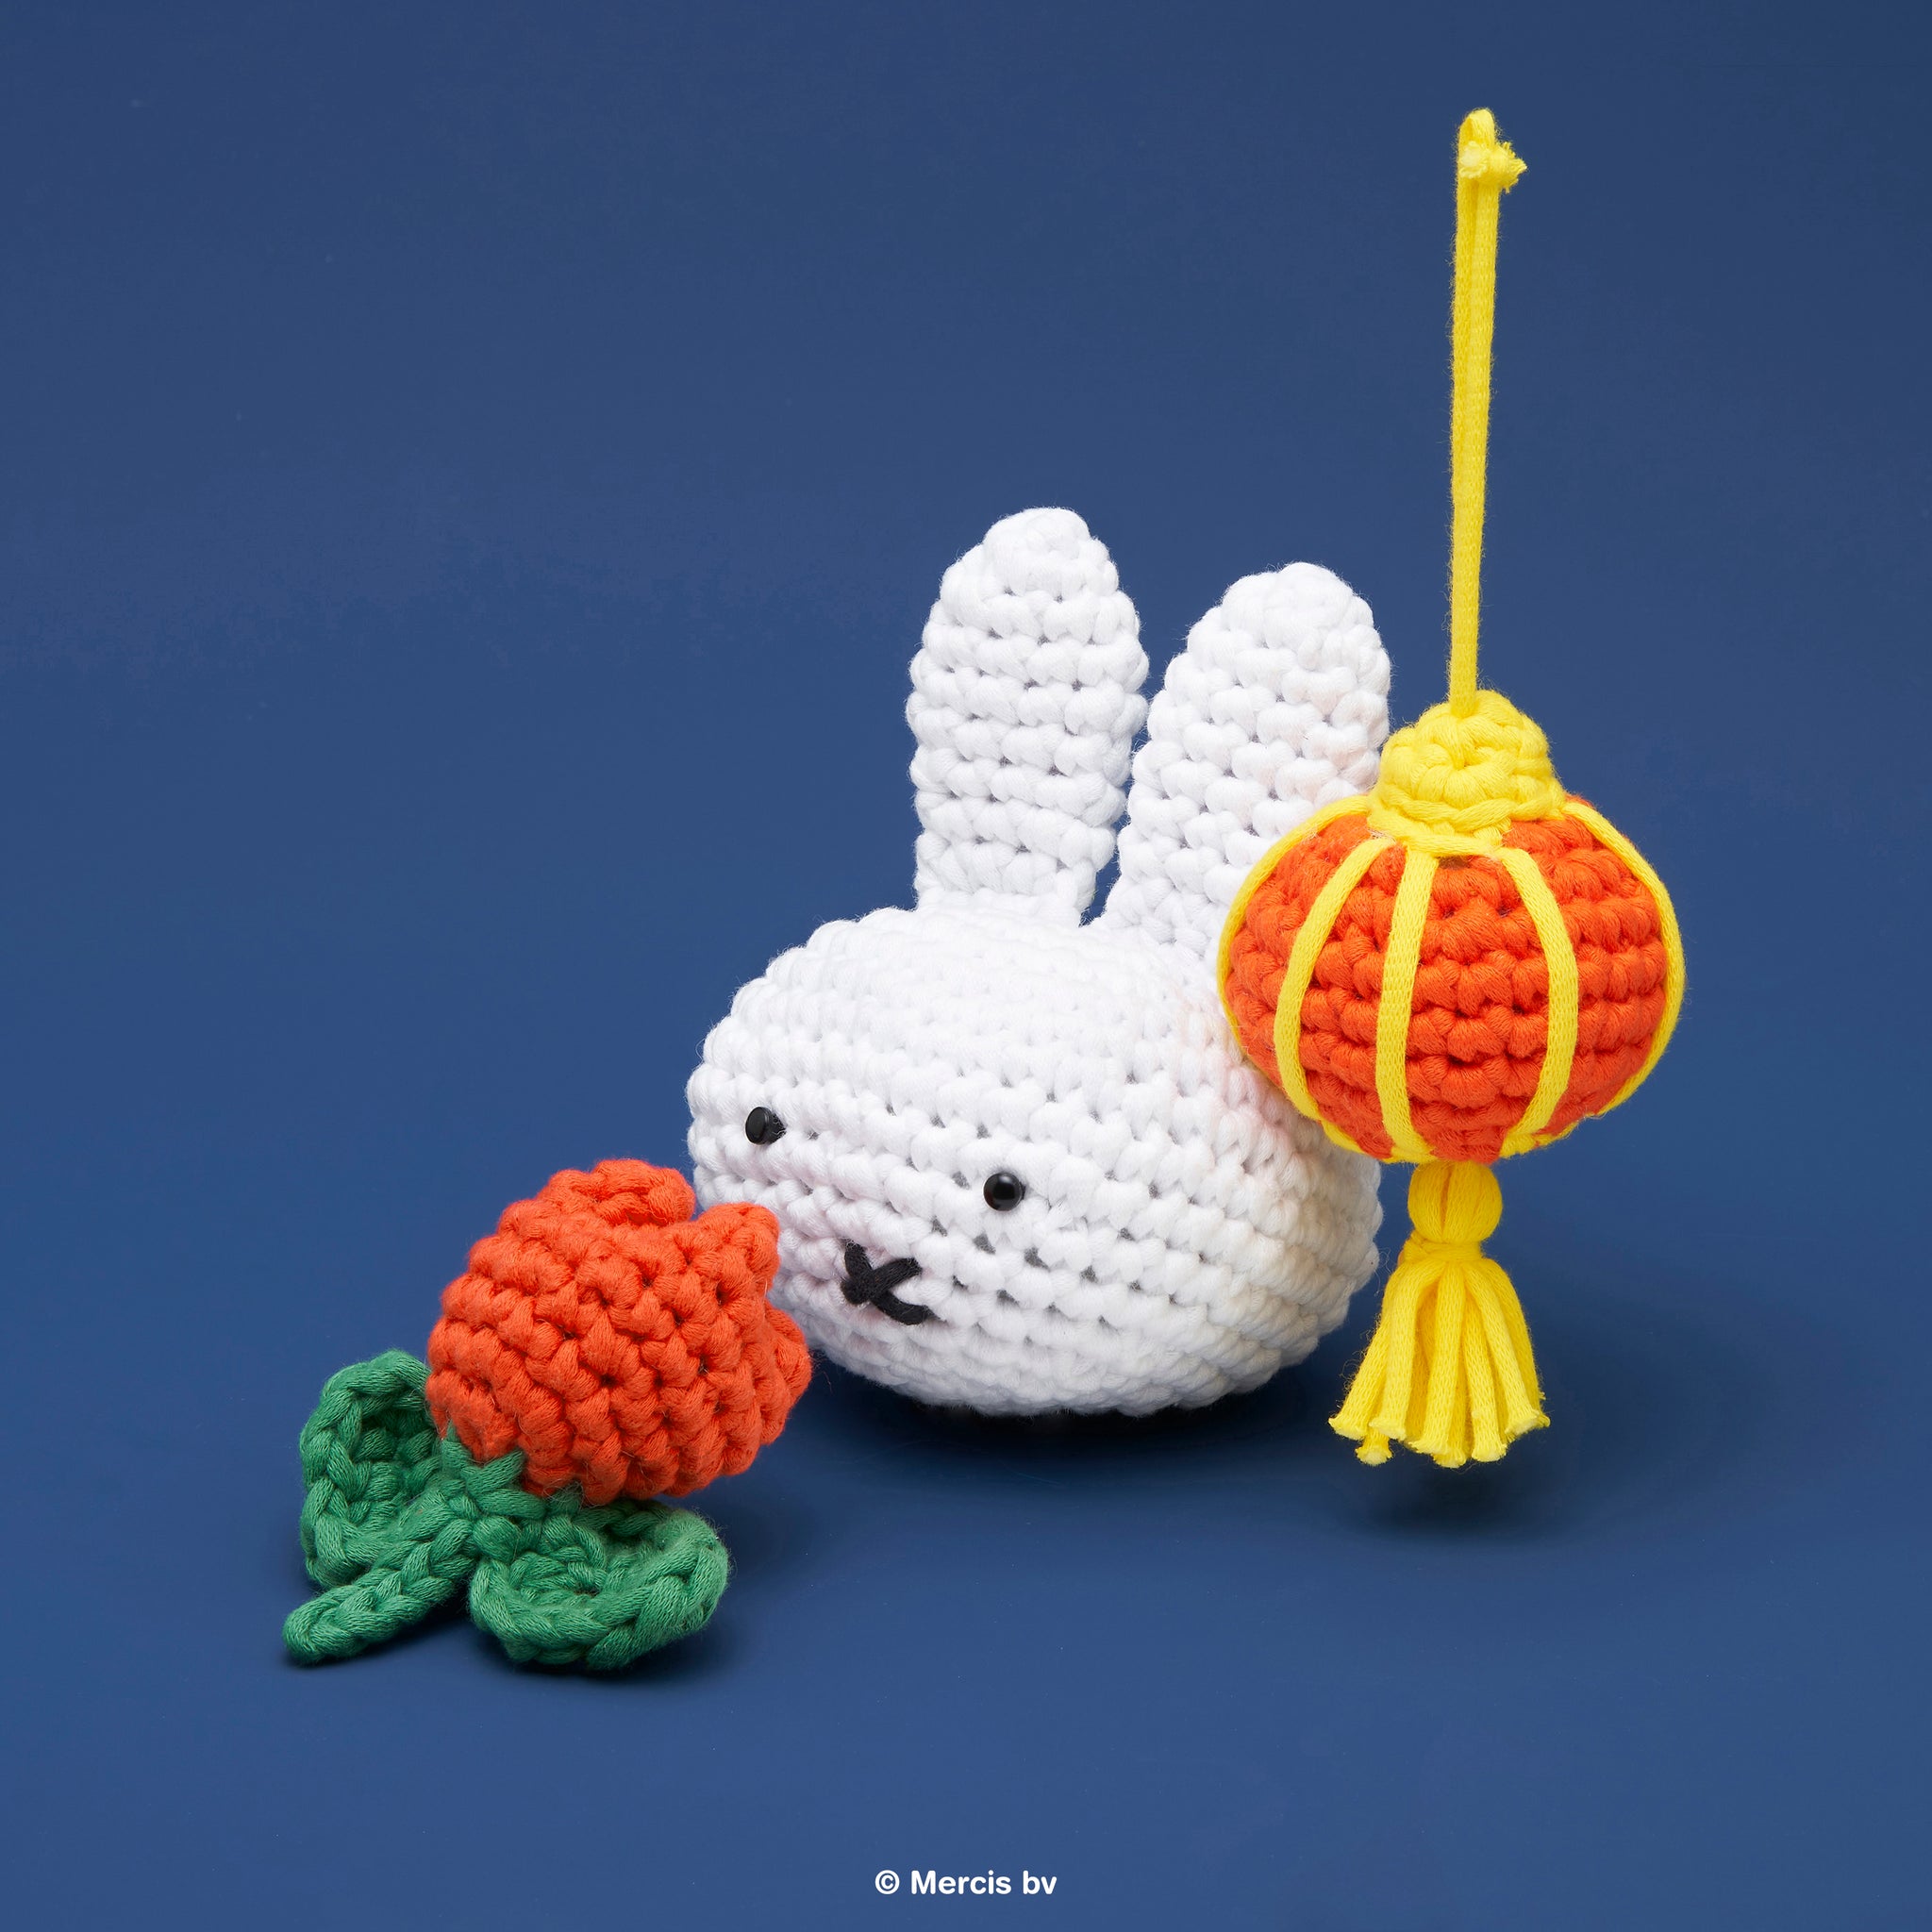 The Woobles' Miffy Crochet Kit Full Review With Photos